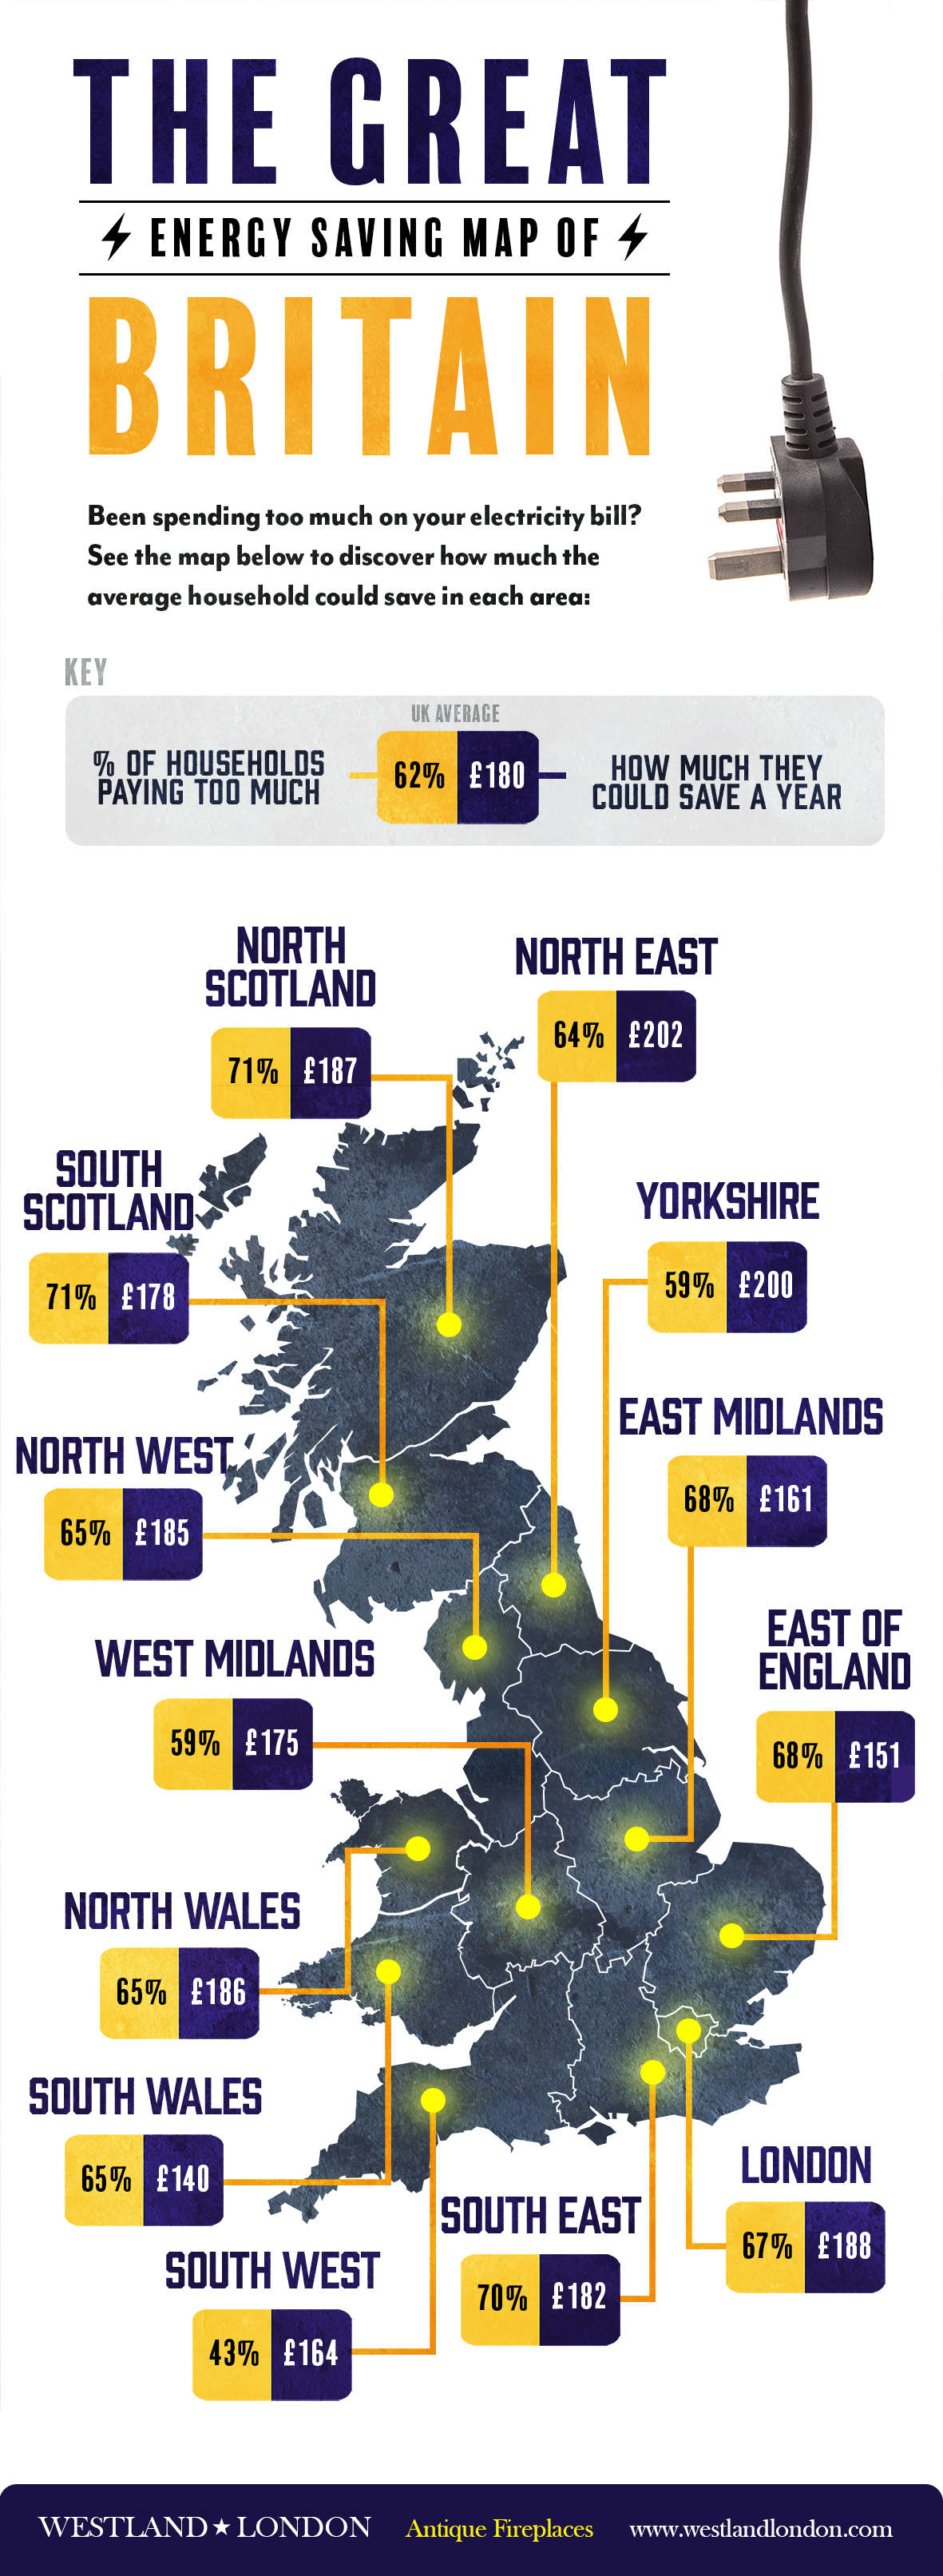 The Great Energy Saving Map of Britain: An Infographic